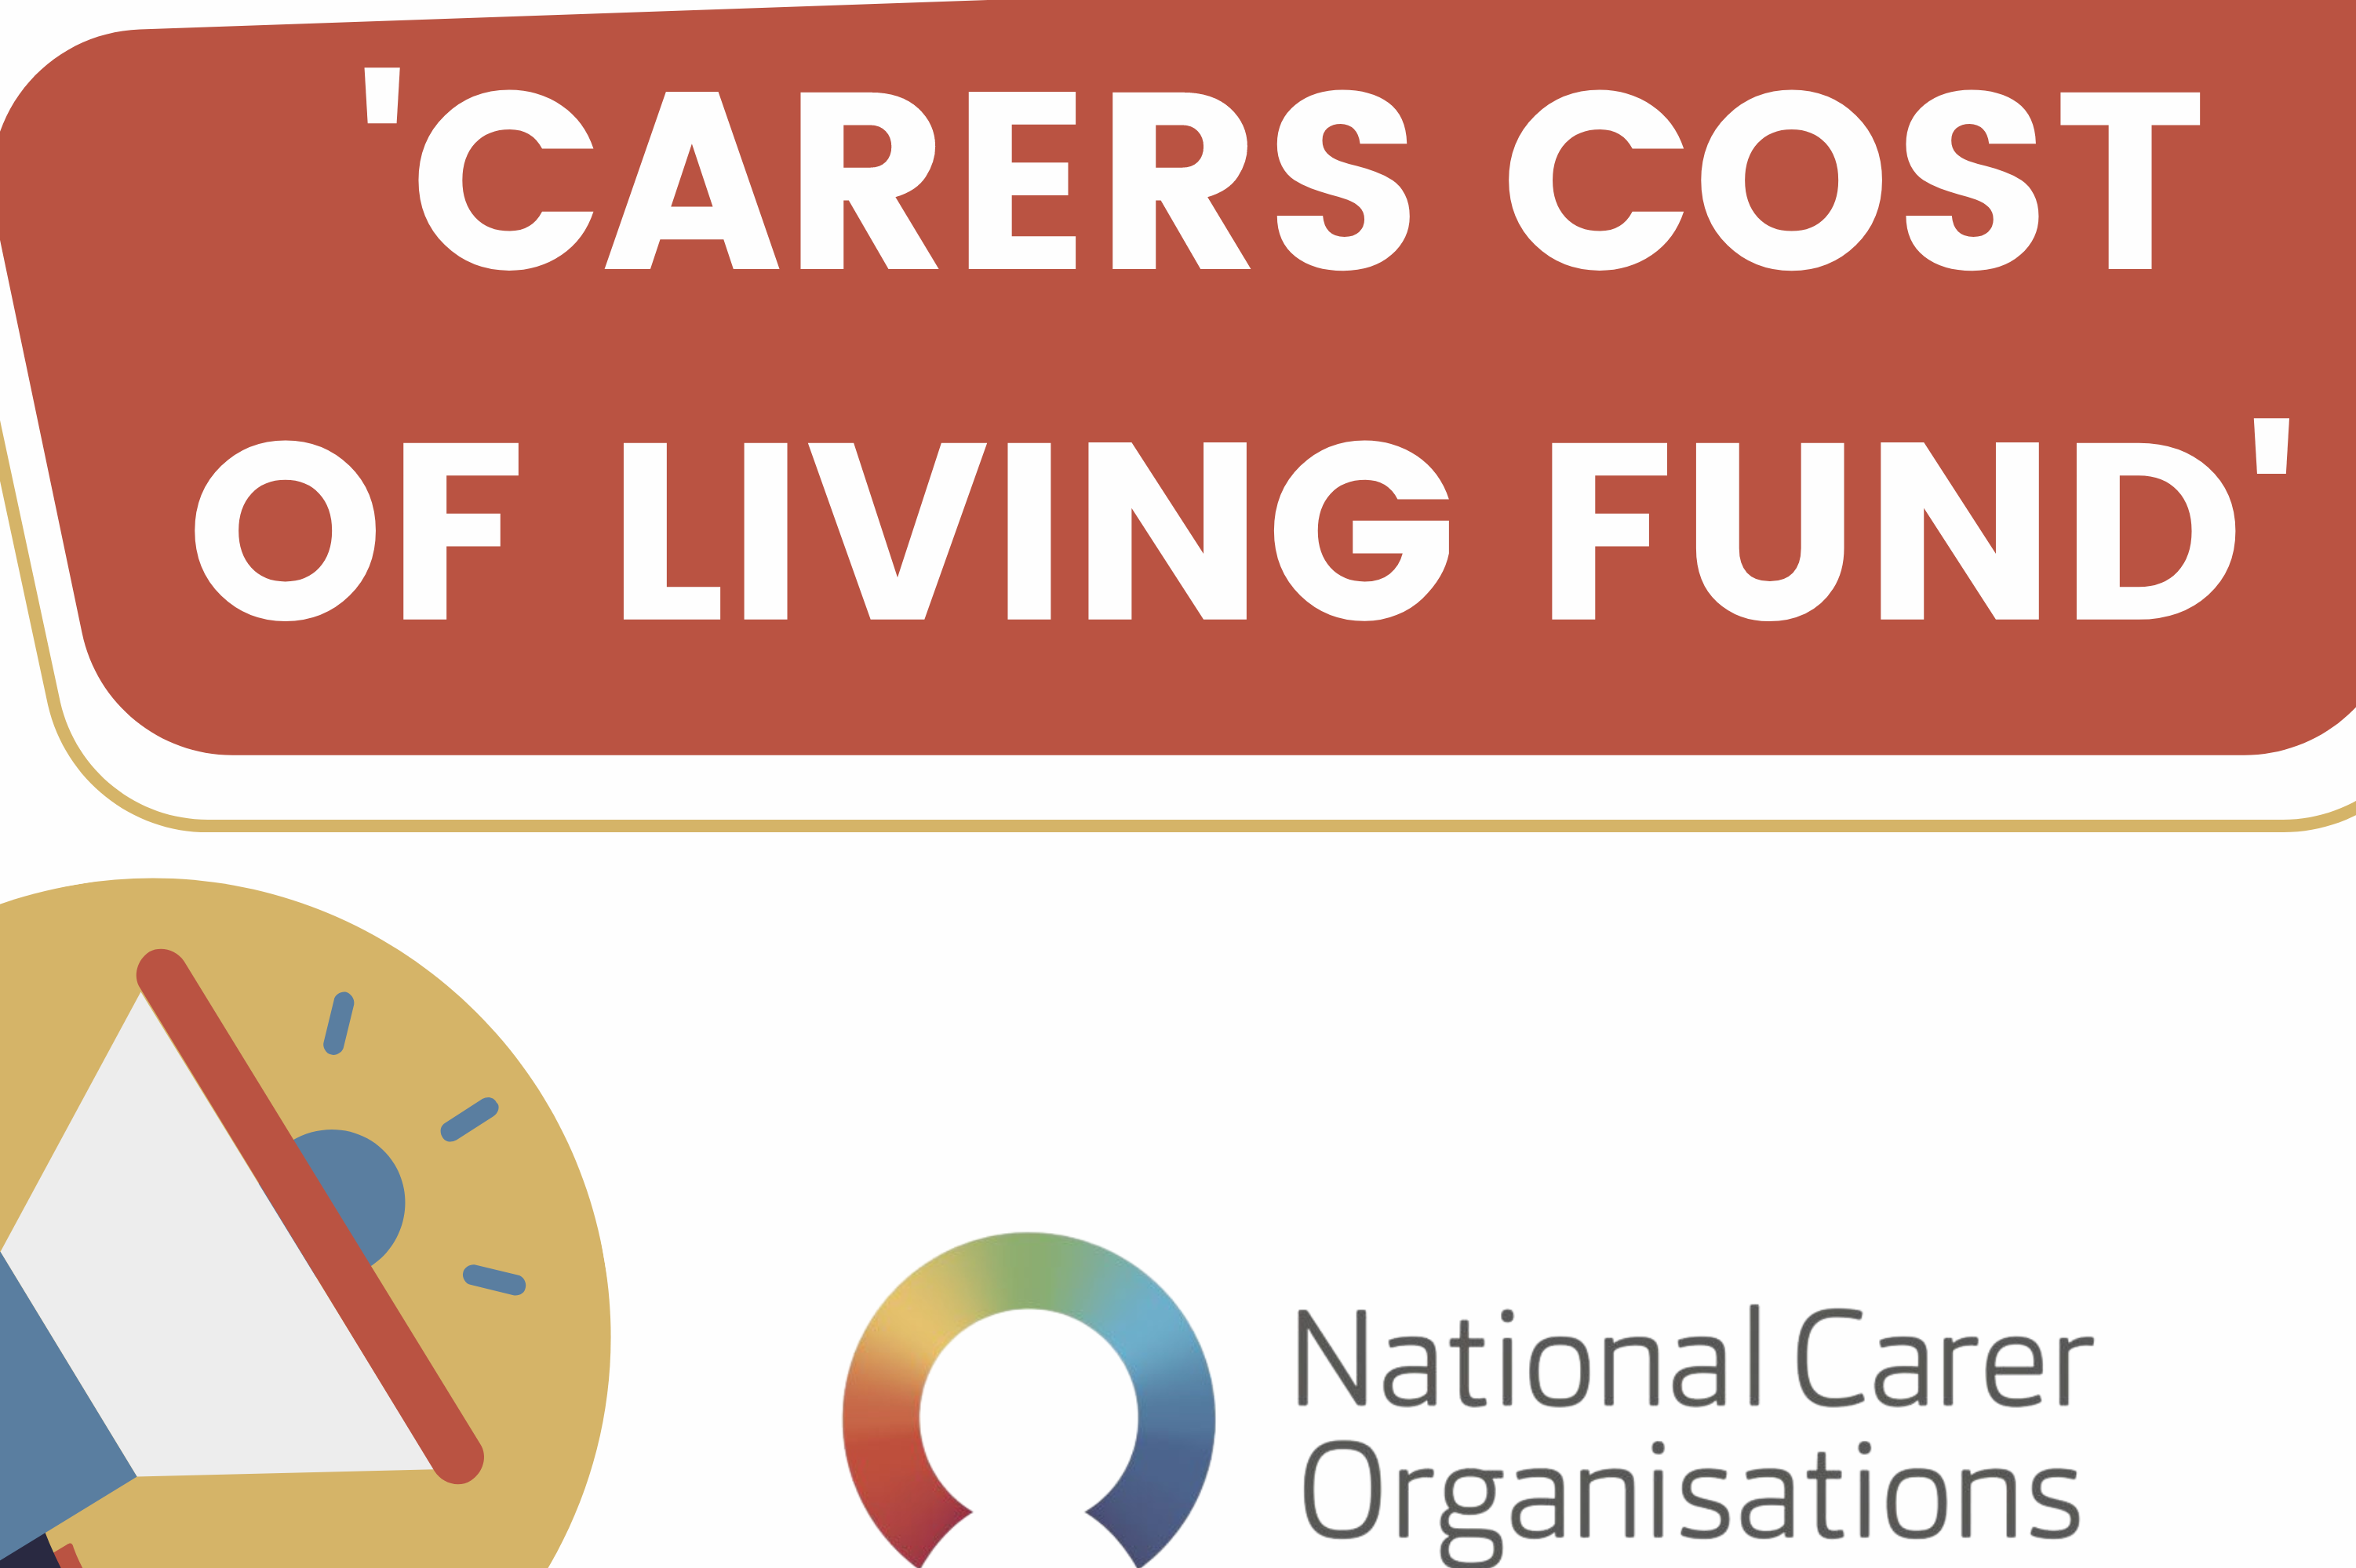 Carers cost of living fund